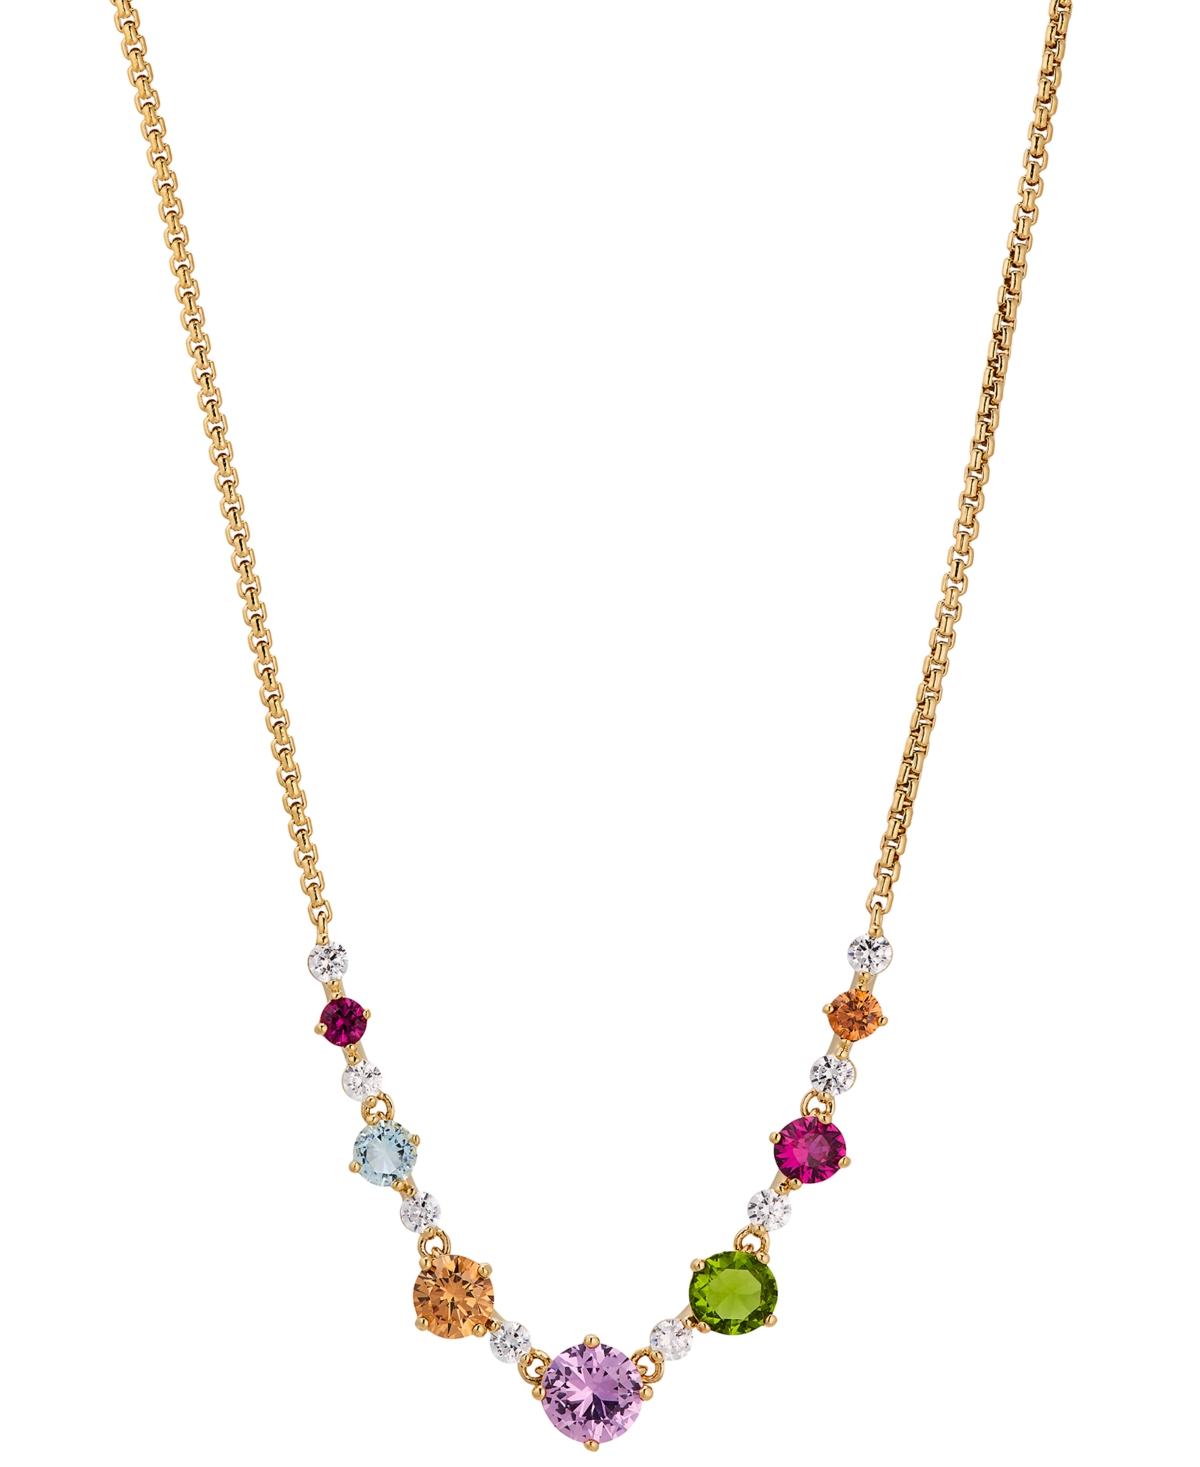 18k Gold-Plated Multicolor Mixed Stone Statement Necklace, 15" + 3" extender, Created for Macy's - Gold